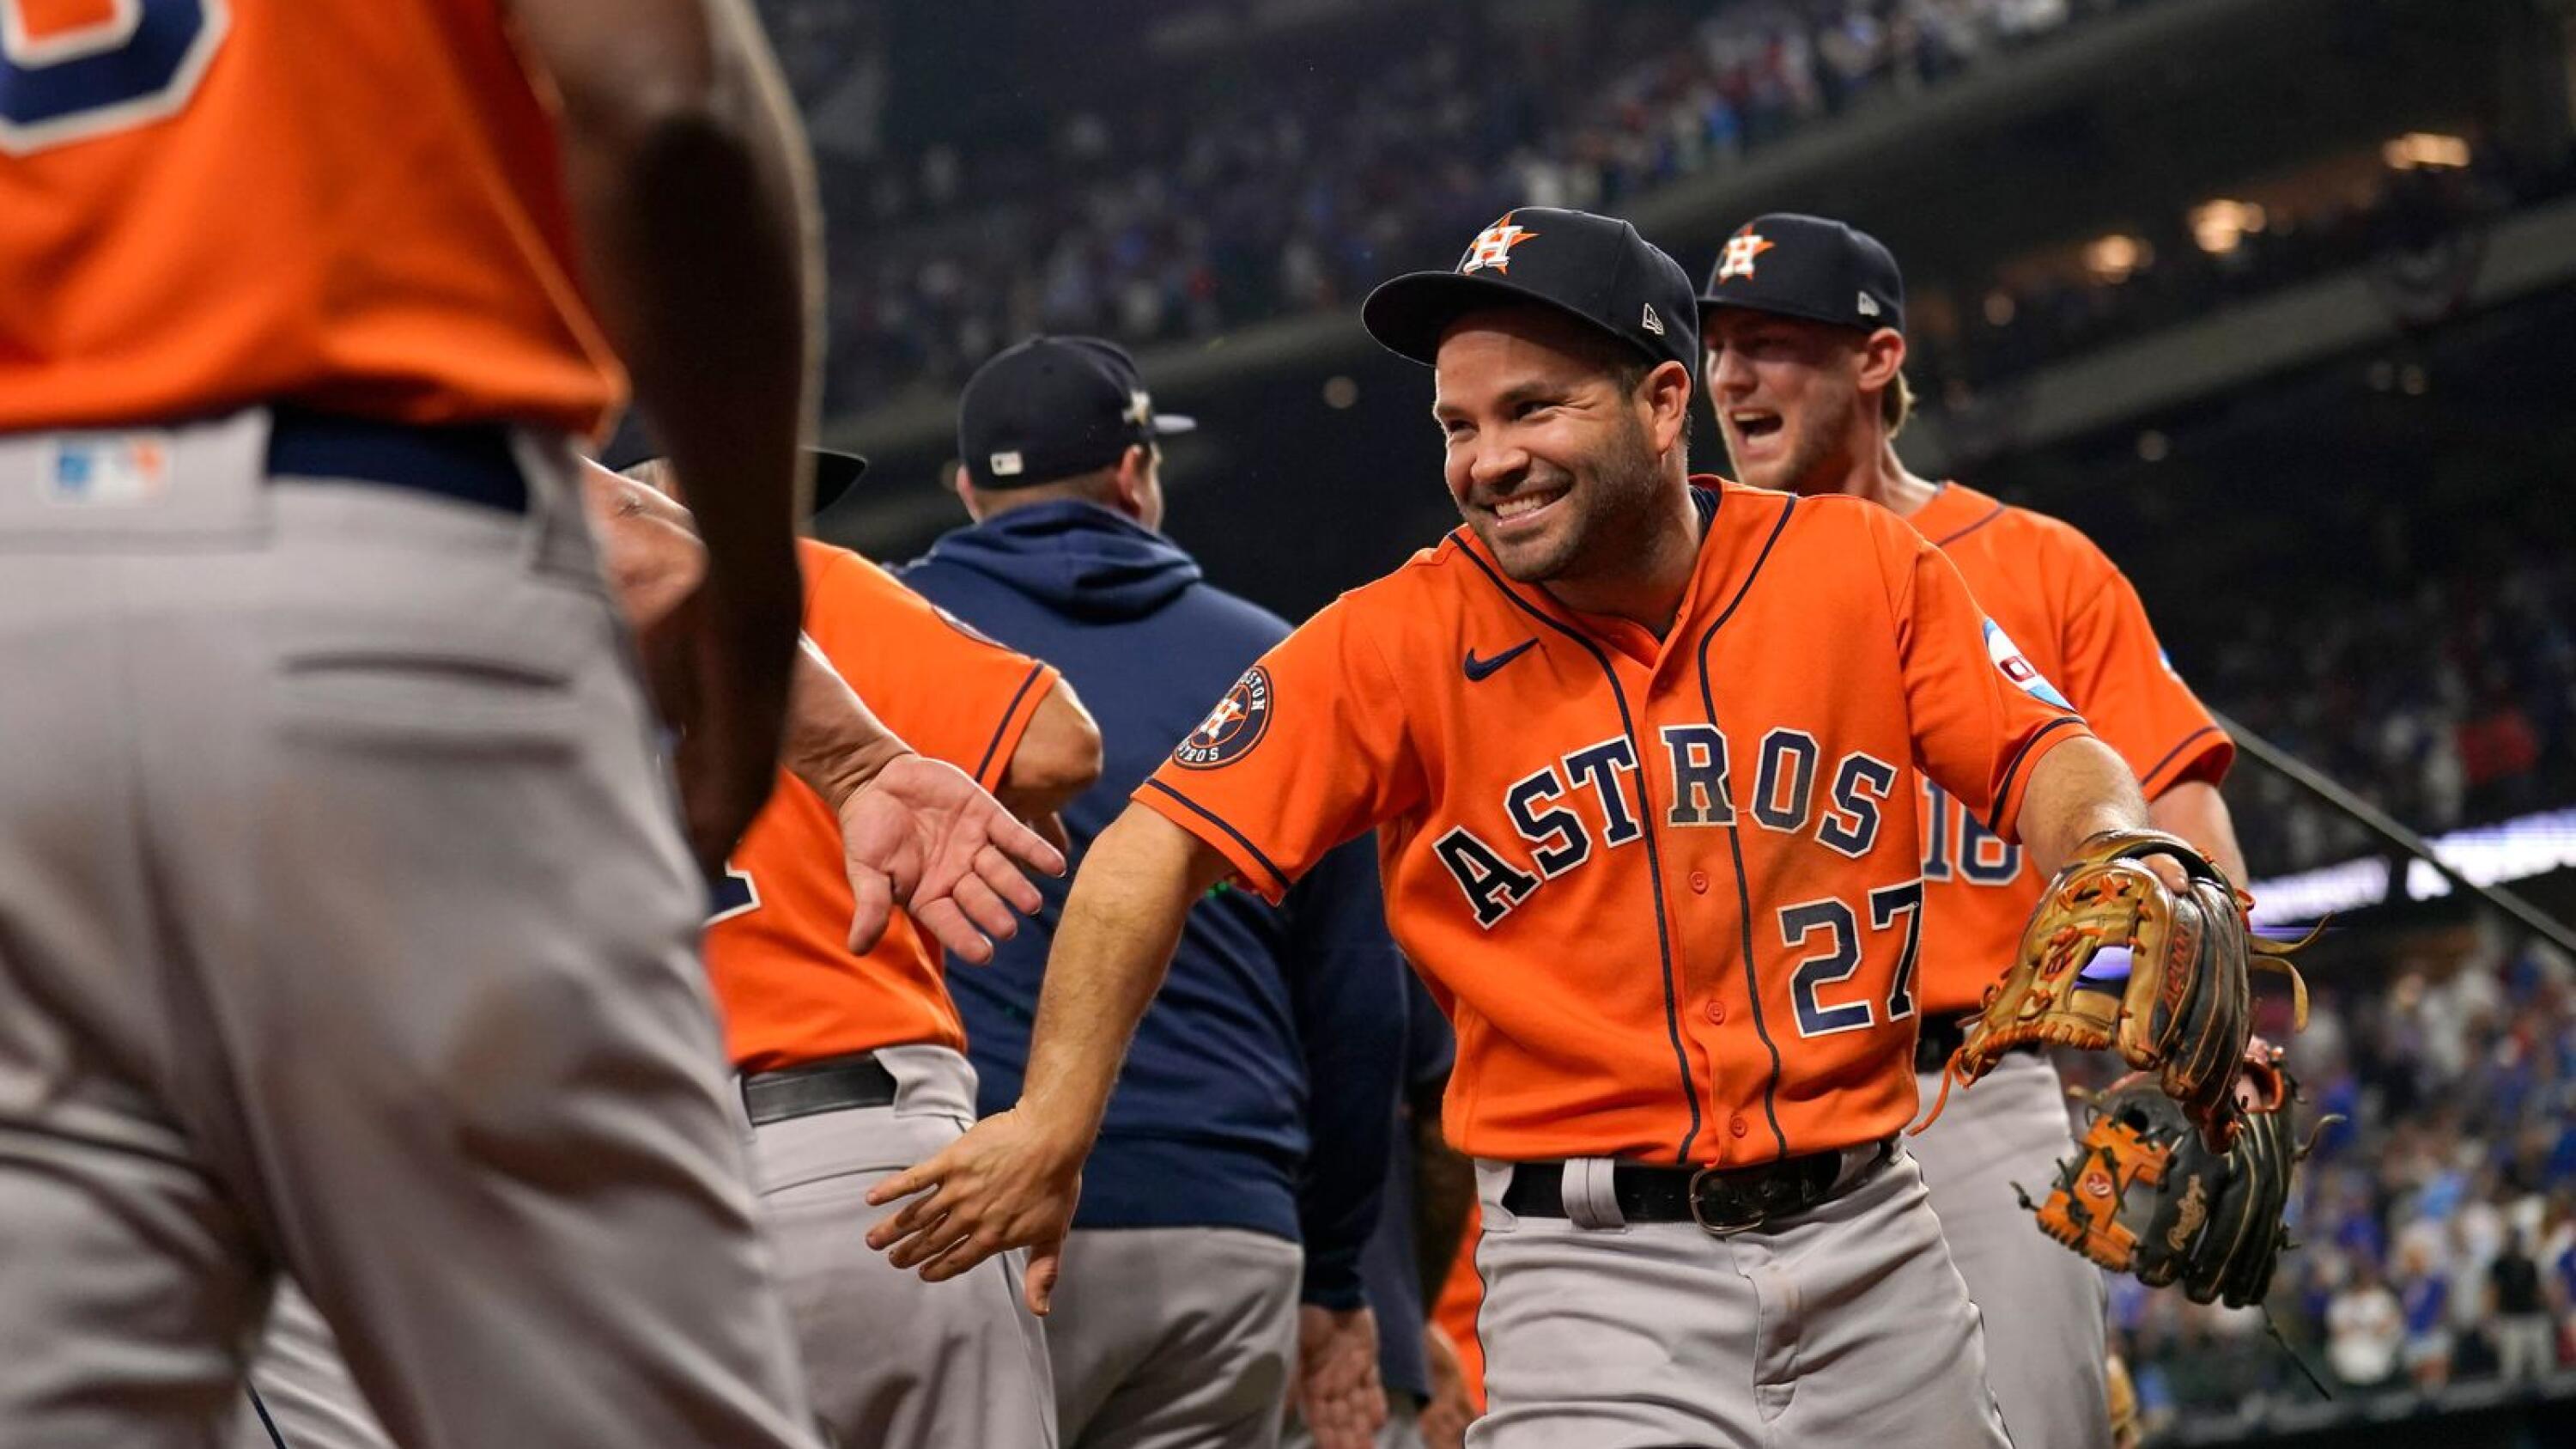 Astros win World Series: A look at Houston's biggest playoff moments